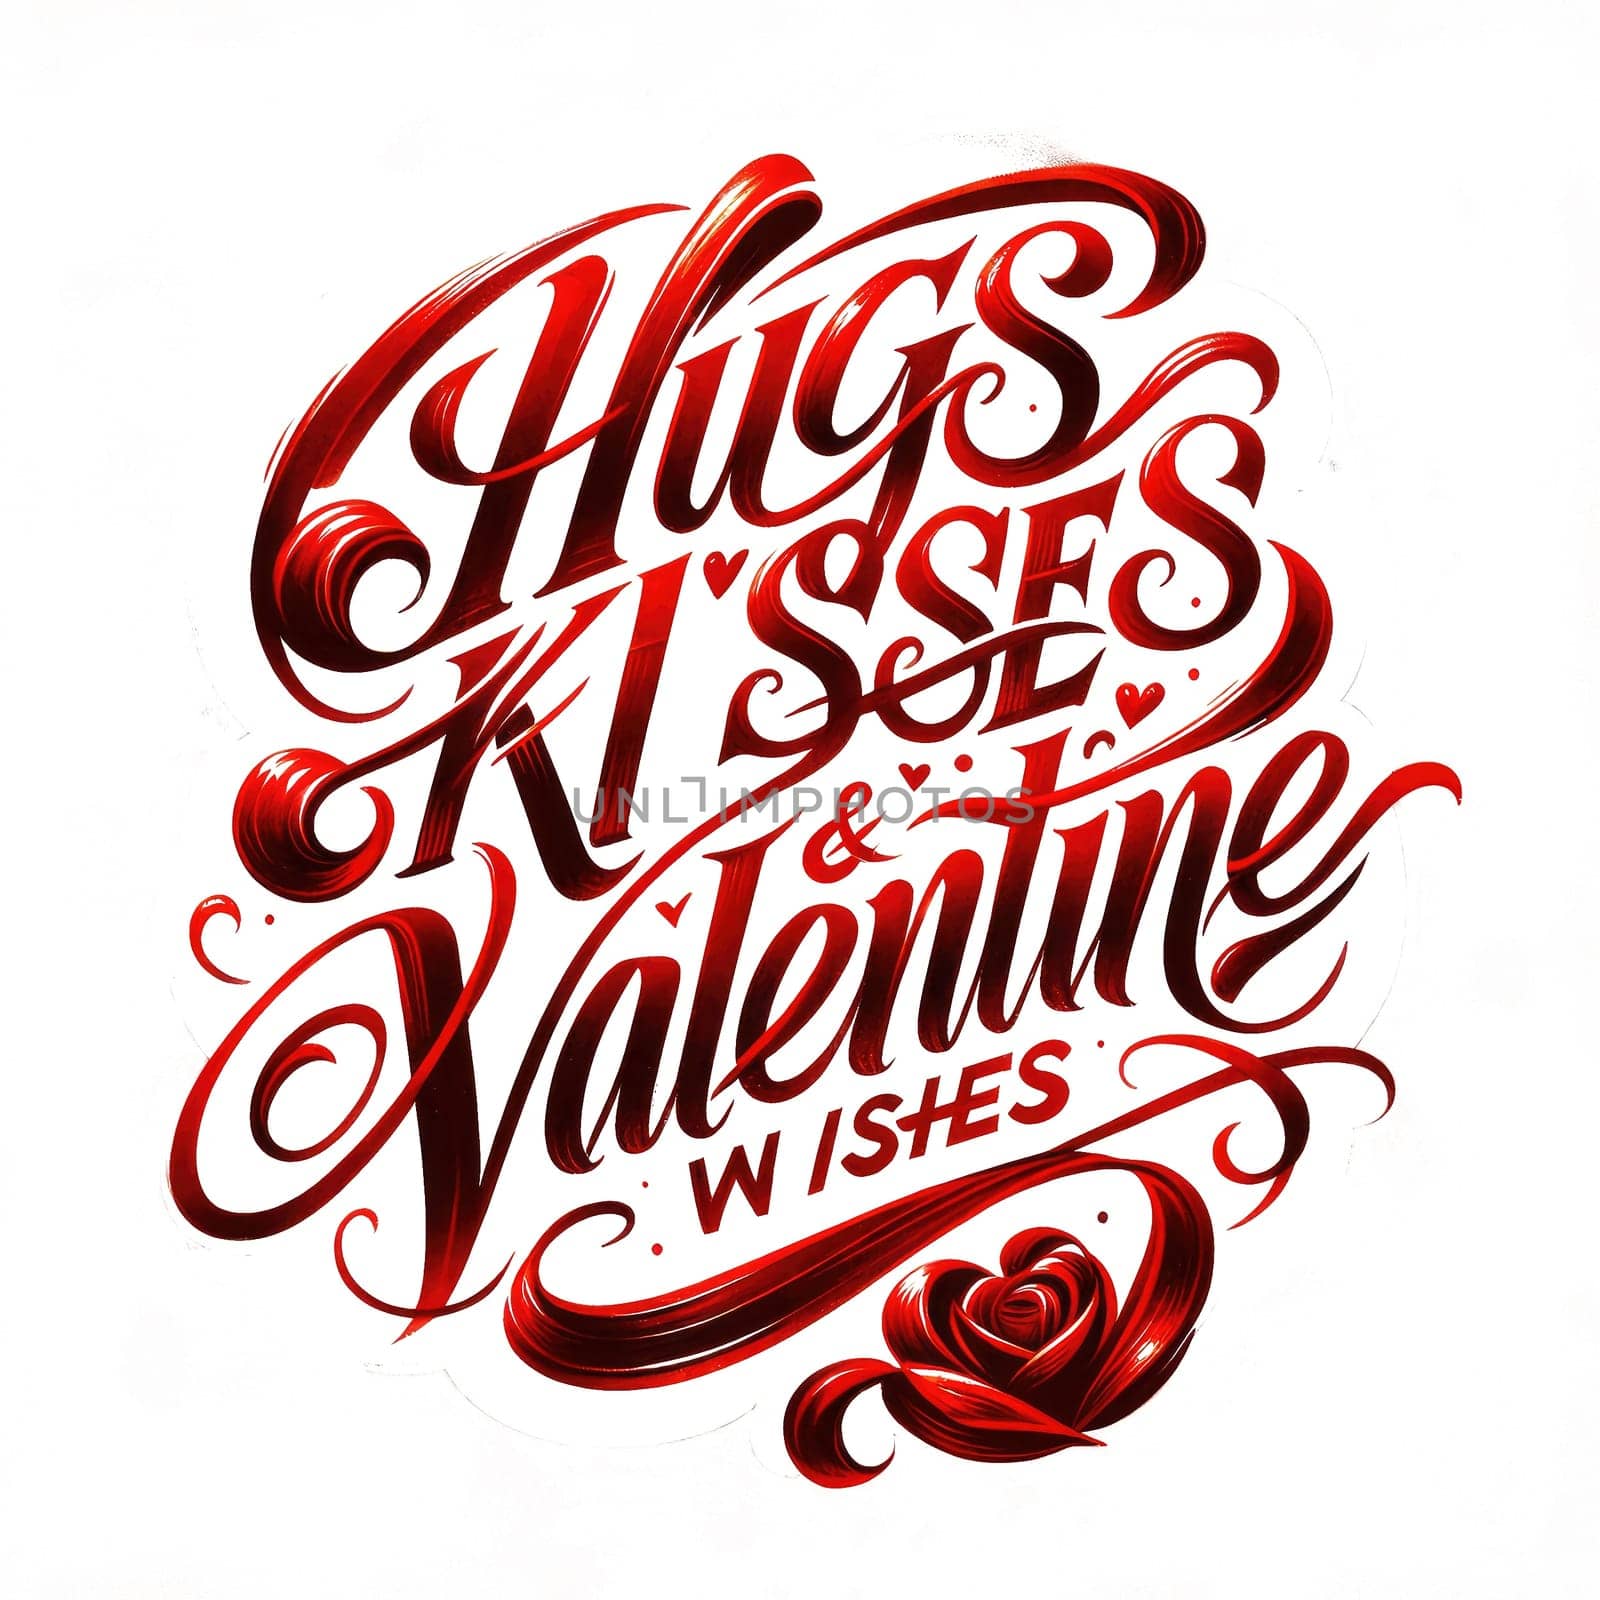 Handwritten lettering valentines day quote for card or poster romantic graphic design. Vellichor.